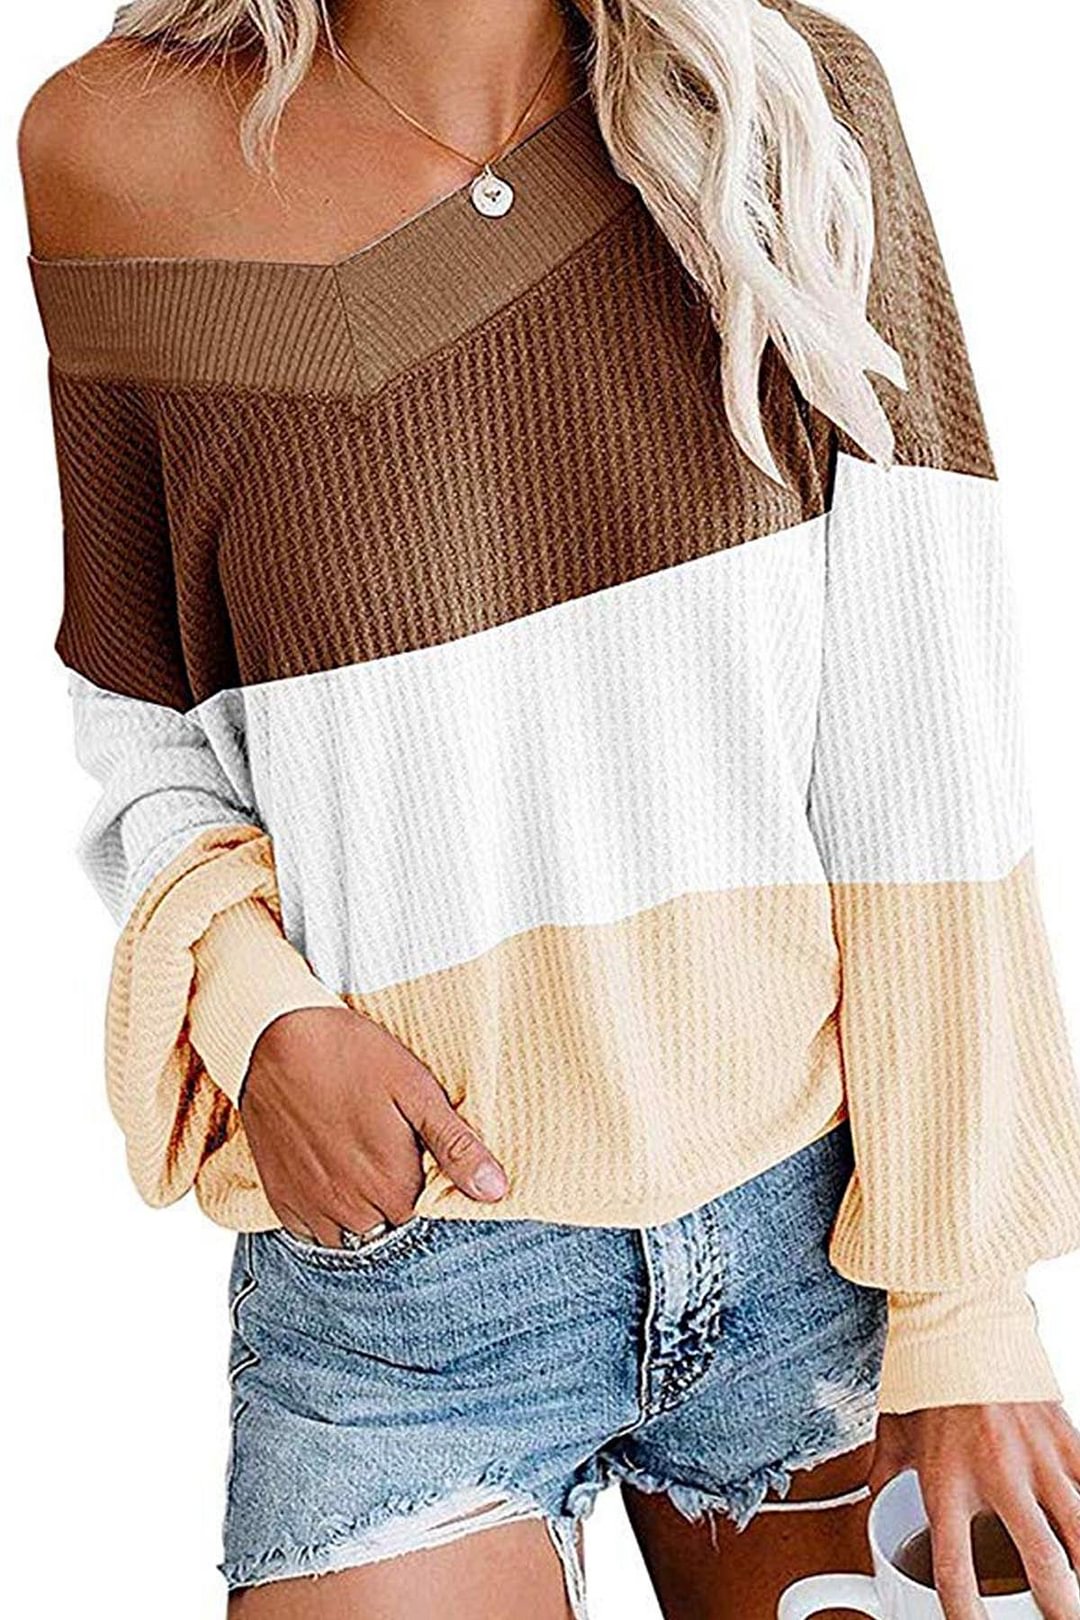 Women's V-neck Batwing Sleeve Sweater Three-color Stitching Loose T-shirt